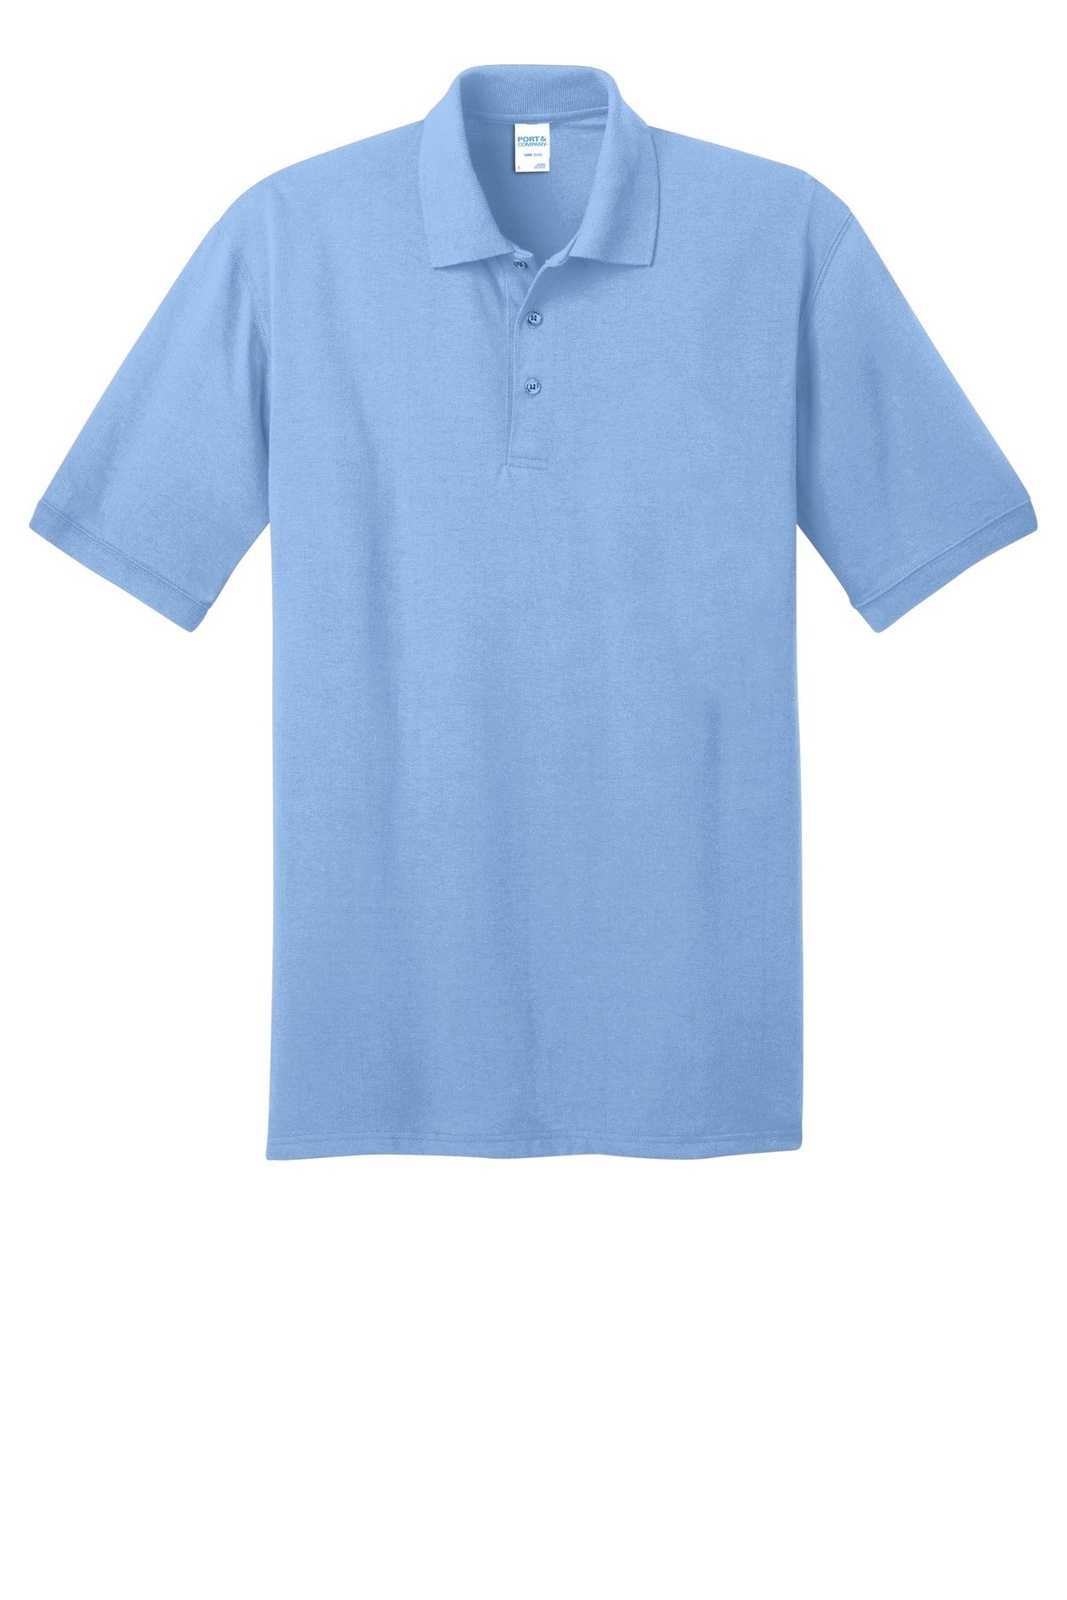 Port & Company KP55T Tall Core Blend Jersey Knit Polo - Light Blue - HIT a Double - 1